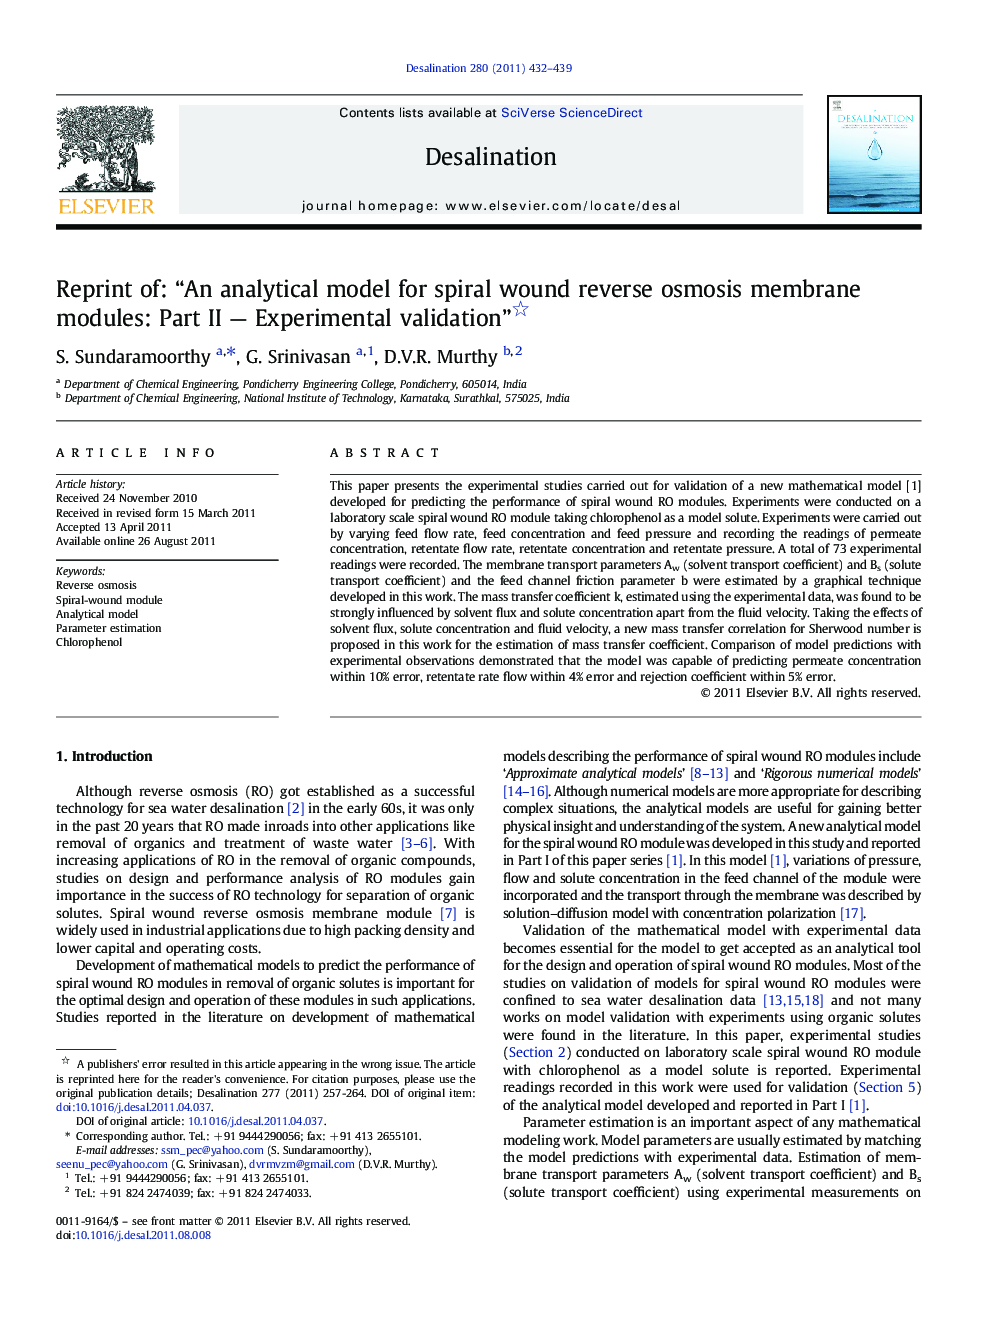 Reprint of: “An analytical model for spiral wound reverse osmosis membrane modules: Part II — Experimental validation” 